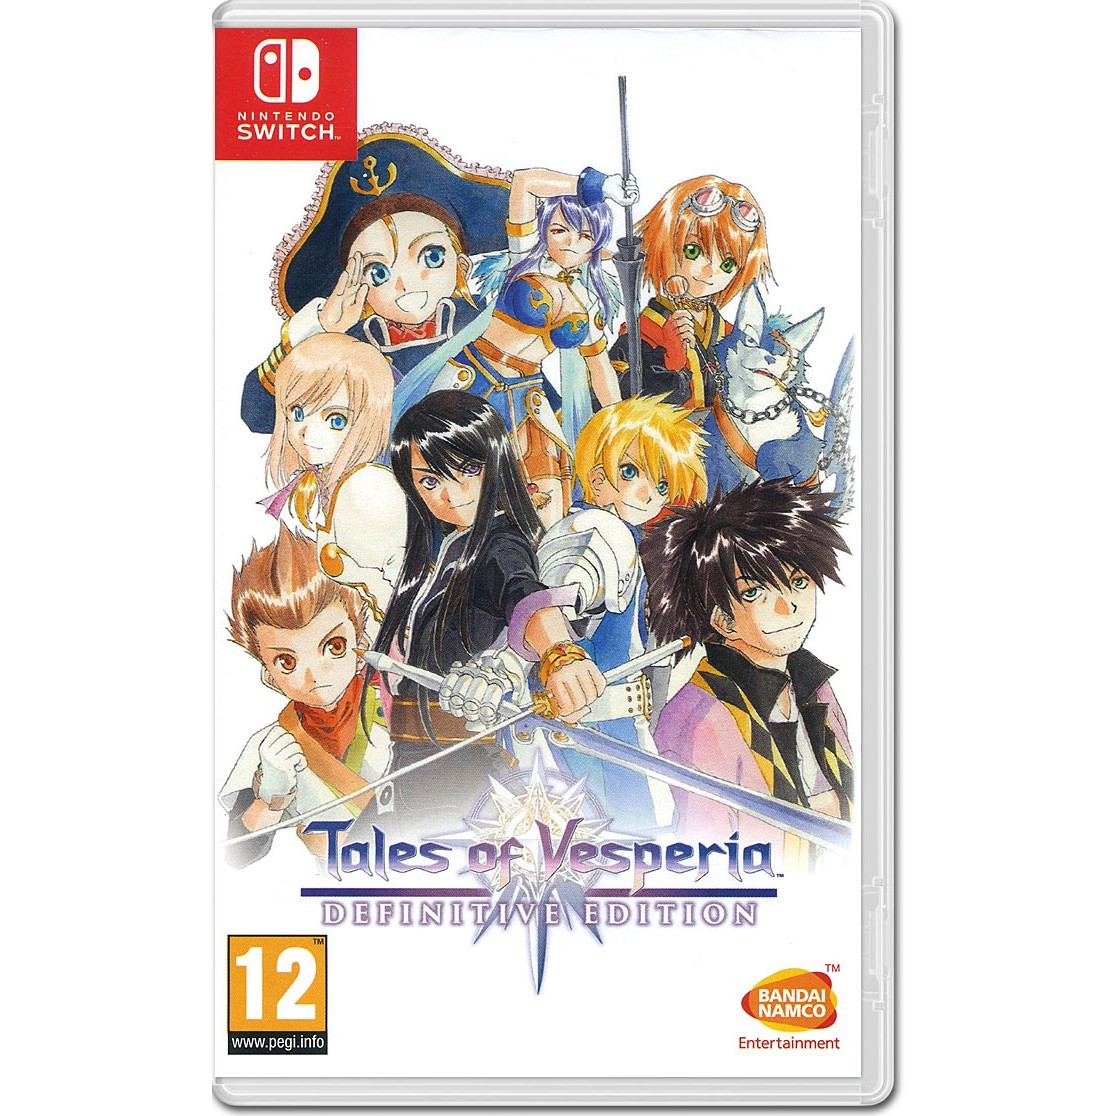 nintendo-switch-game-tales-of-vesperia-definitive-edition